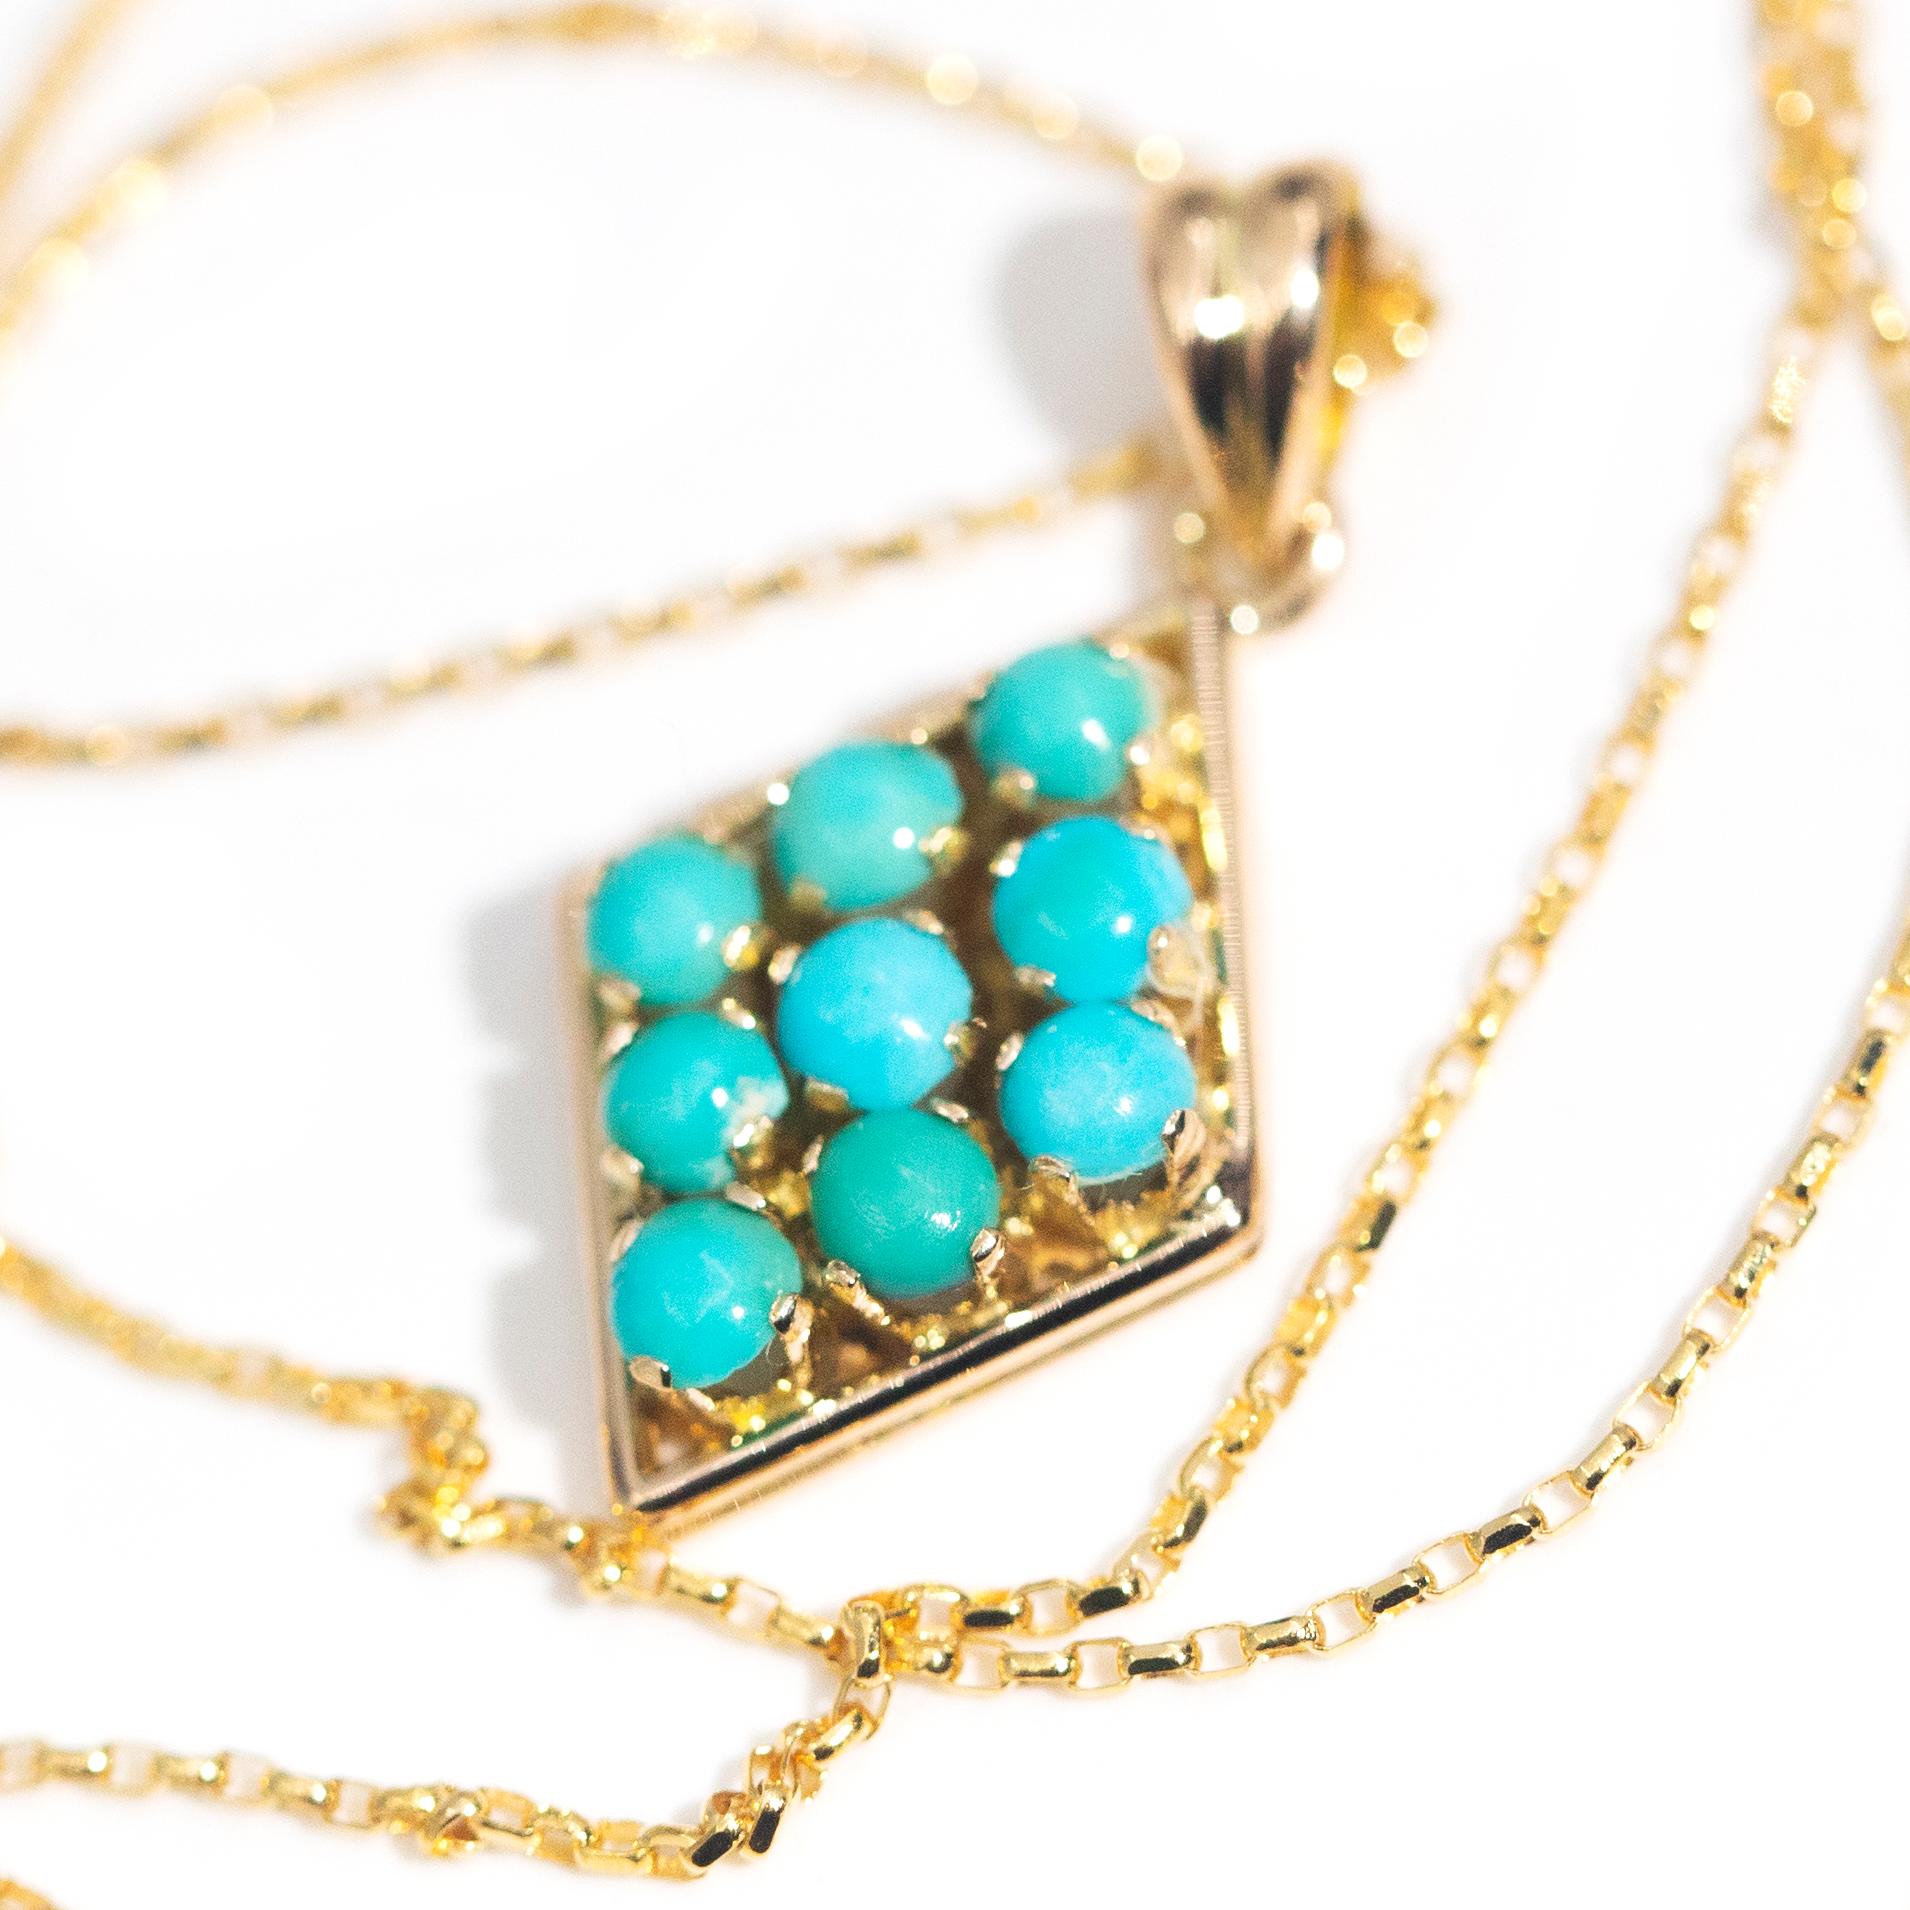 Modern Vintage Circa 1970s 14 Carat Yellow Gold Turquoise Bead Pendant and Chain For Sale